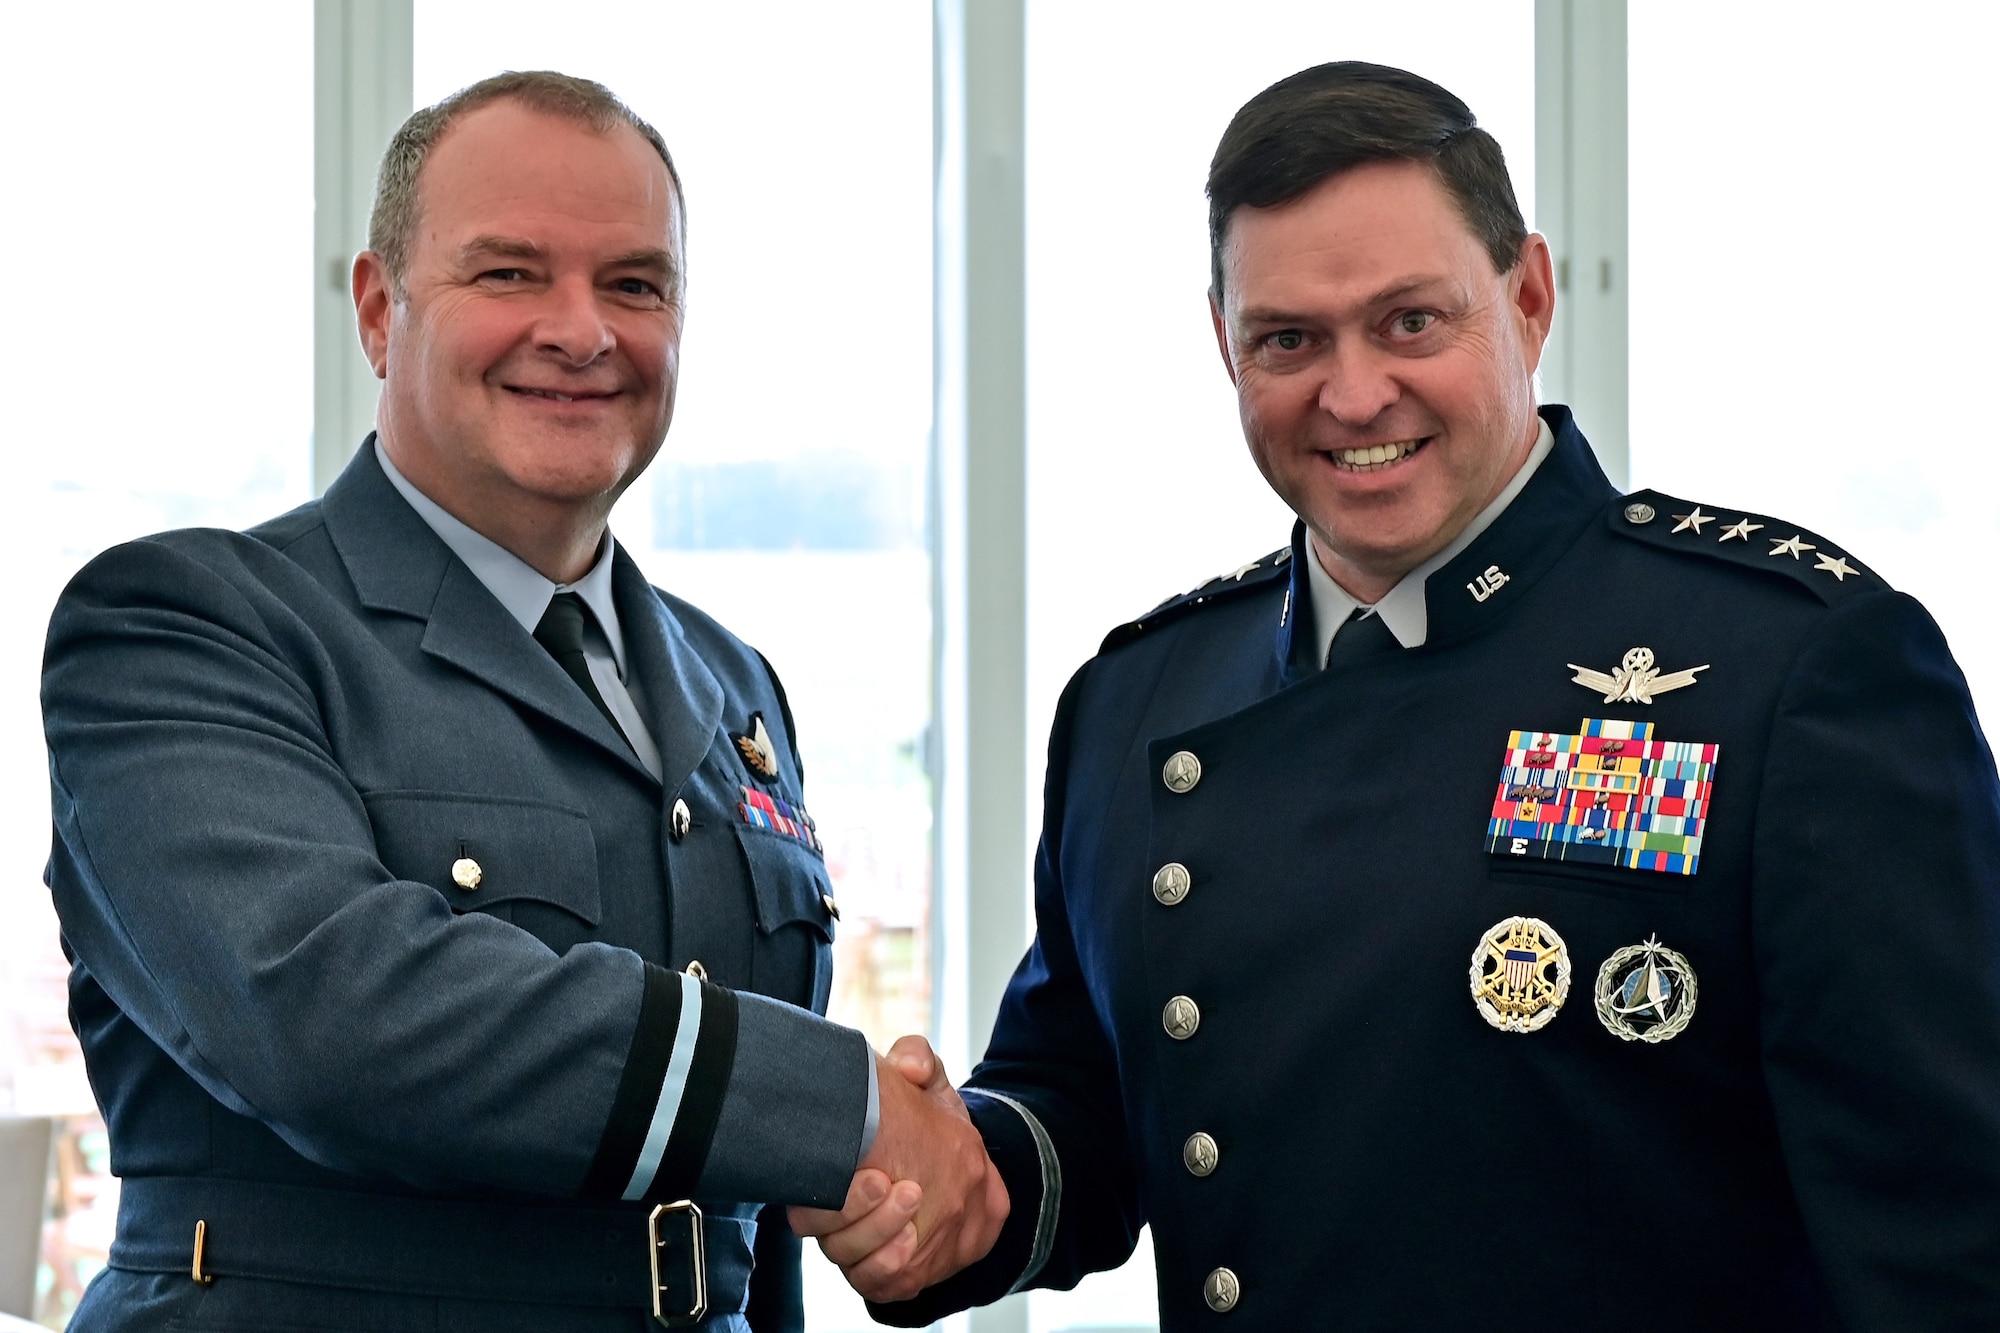 Chief of Space Operations Gen. Chance Saltzman meets with Royal Air Force Air and Space Warfare Centre Commandant Air Cdre Blythe Crawford at the Royal International Air Tattoo at RAF Fairford, England, July 14, 2023. Saltzman and Crawford discussed opportunities for the Space Force and ASWC to partner to build resilient, ready, and combat-credible forces. (U.S. Air Force photo by SSgt. Jeremy McGuffin)